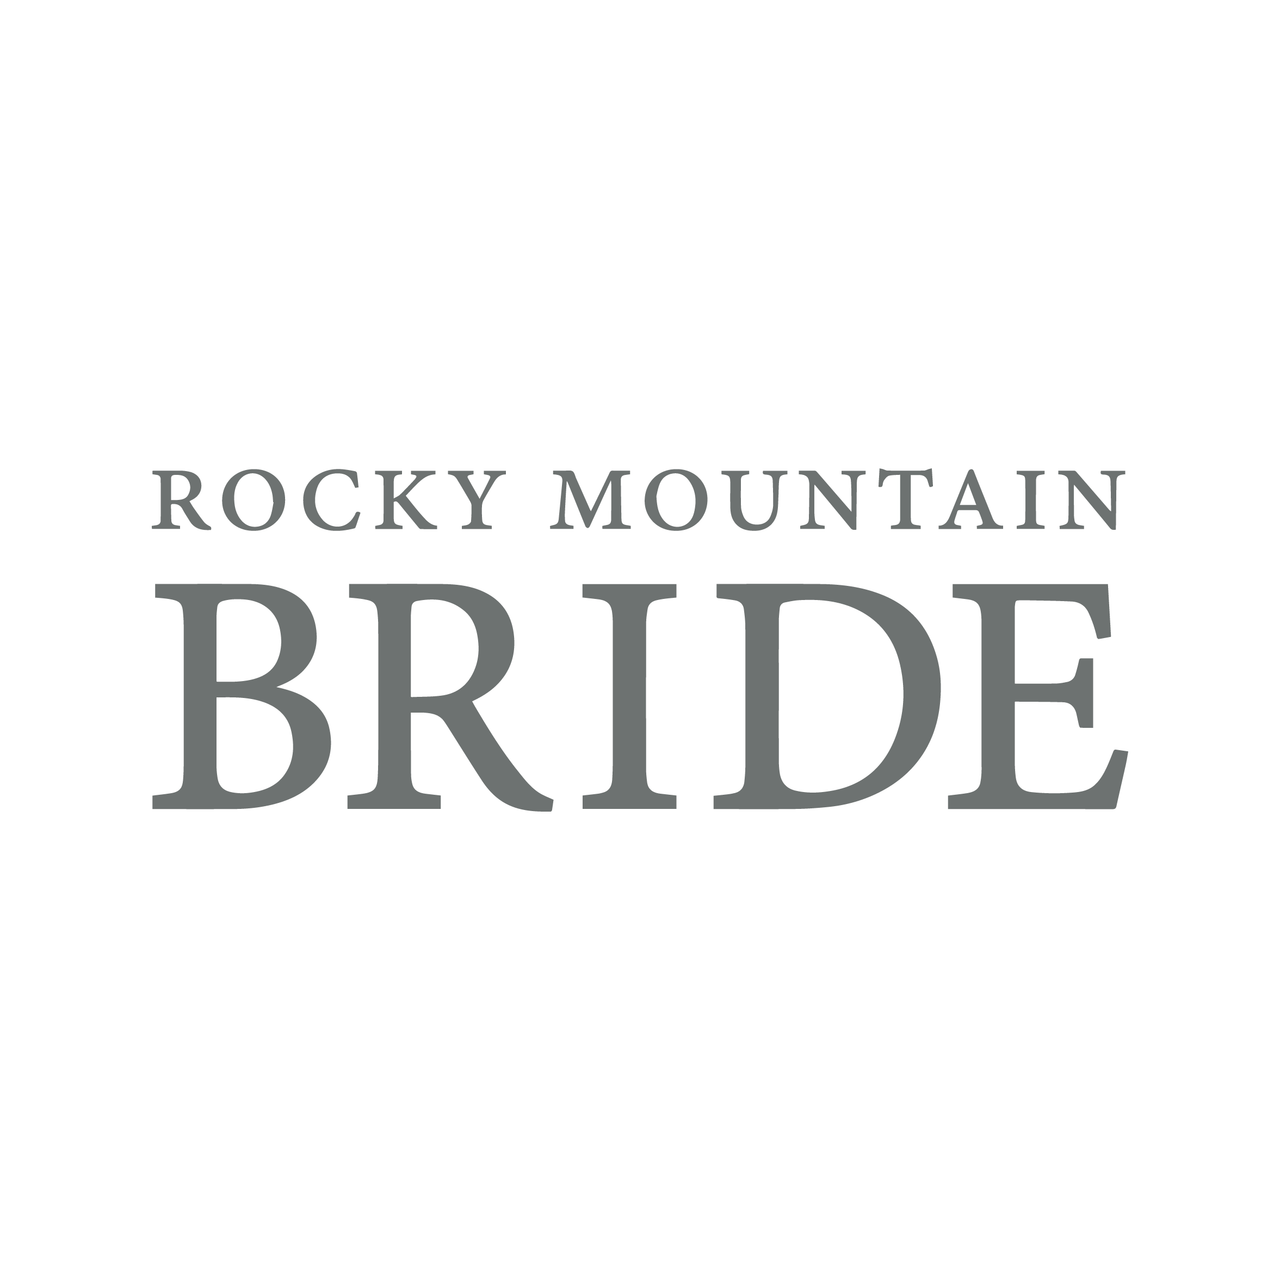 by catalfo bridal featured on rocky mountain bride magazine